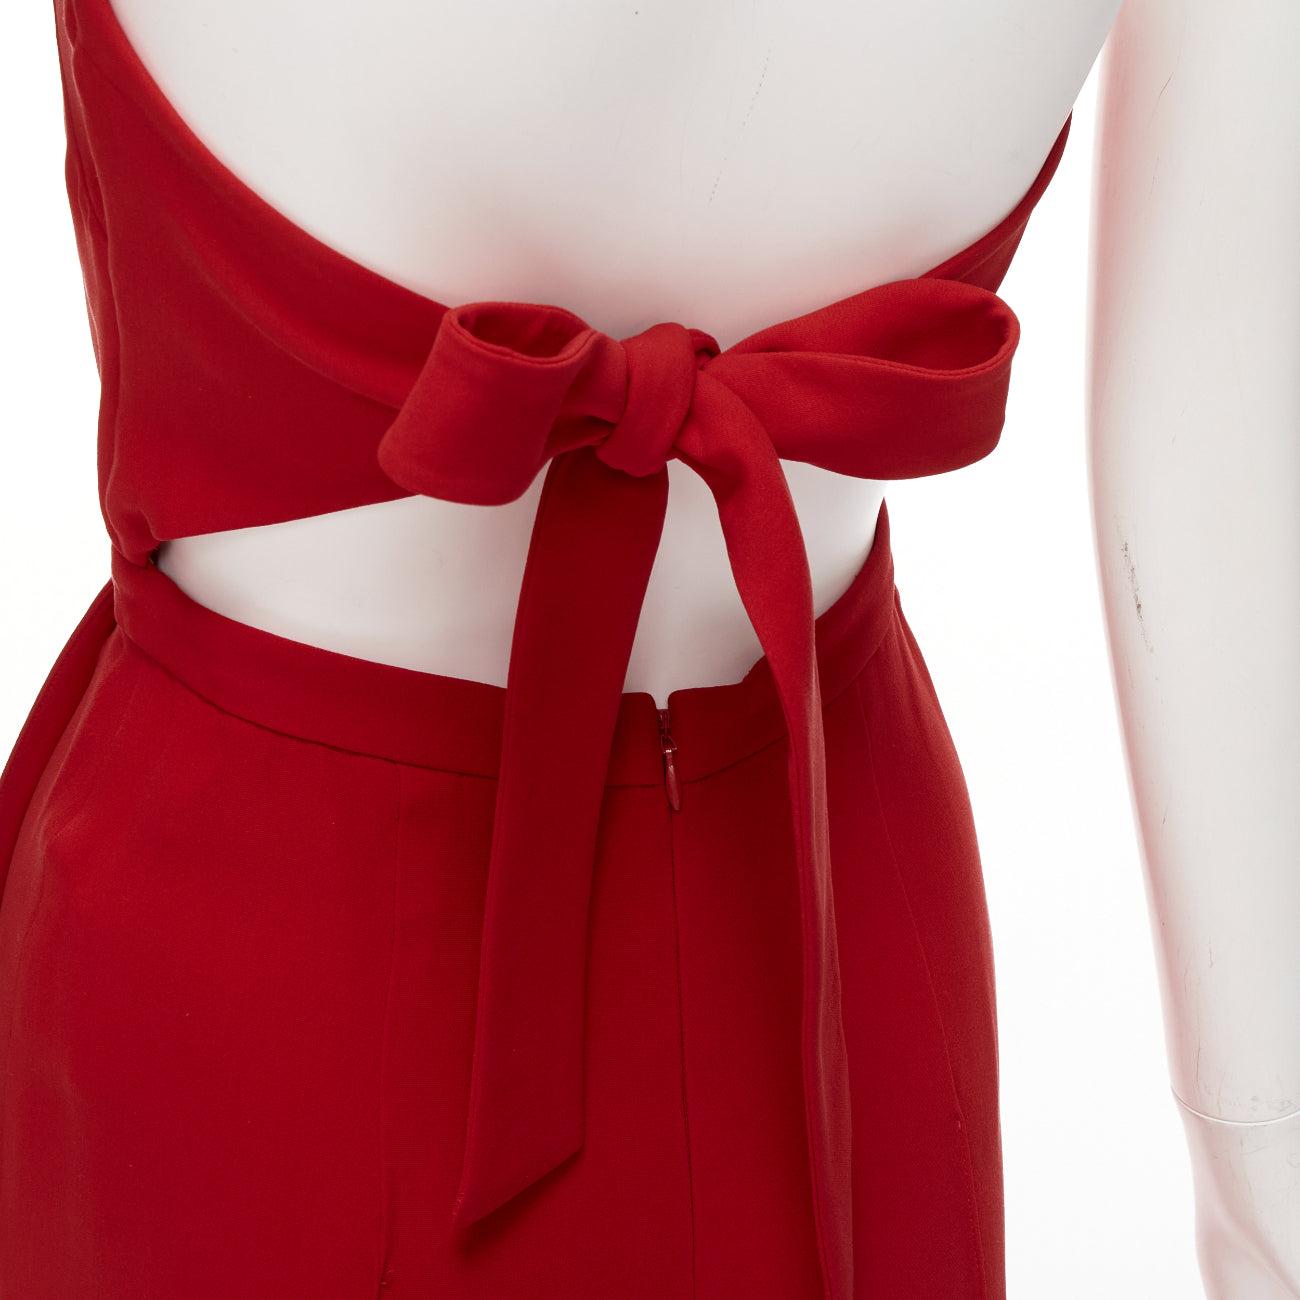 VALENTINO 100% silk red strapless back tie bow wide leg jumpsuit IT38 XS
Reference: LNKO/A02337
Brand: Valentino
Designer: Pier Paolo Piccioli
Material: Silk
Color: Red
Pattern: Solid
Closure: Self Tie
Lining: Beige Mesh
Extra Details: Self tie back